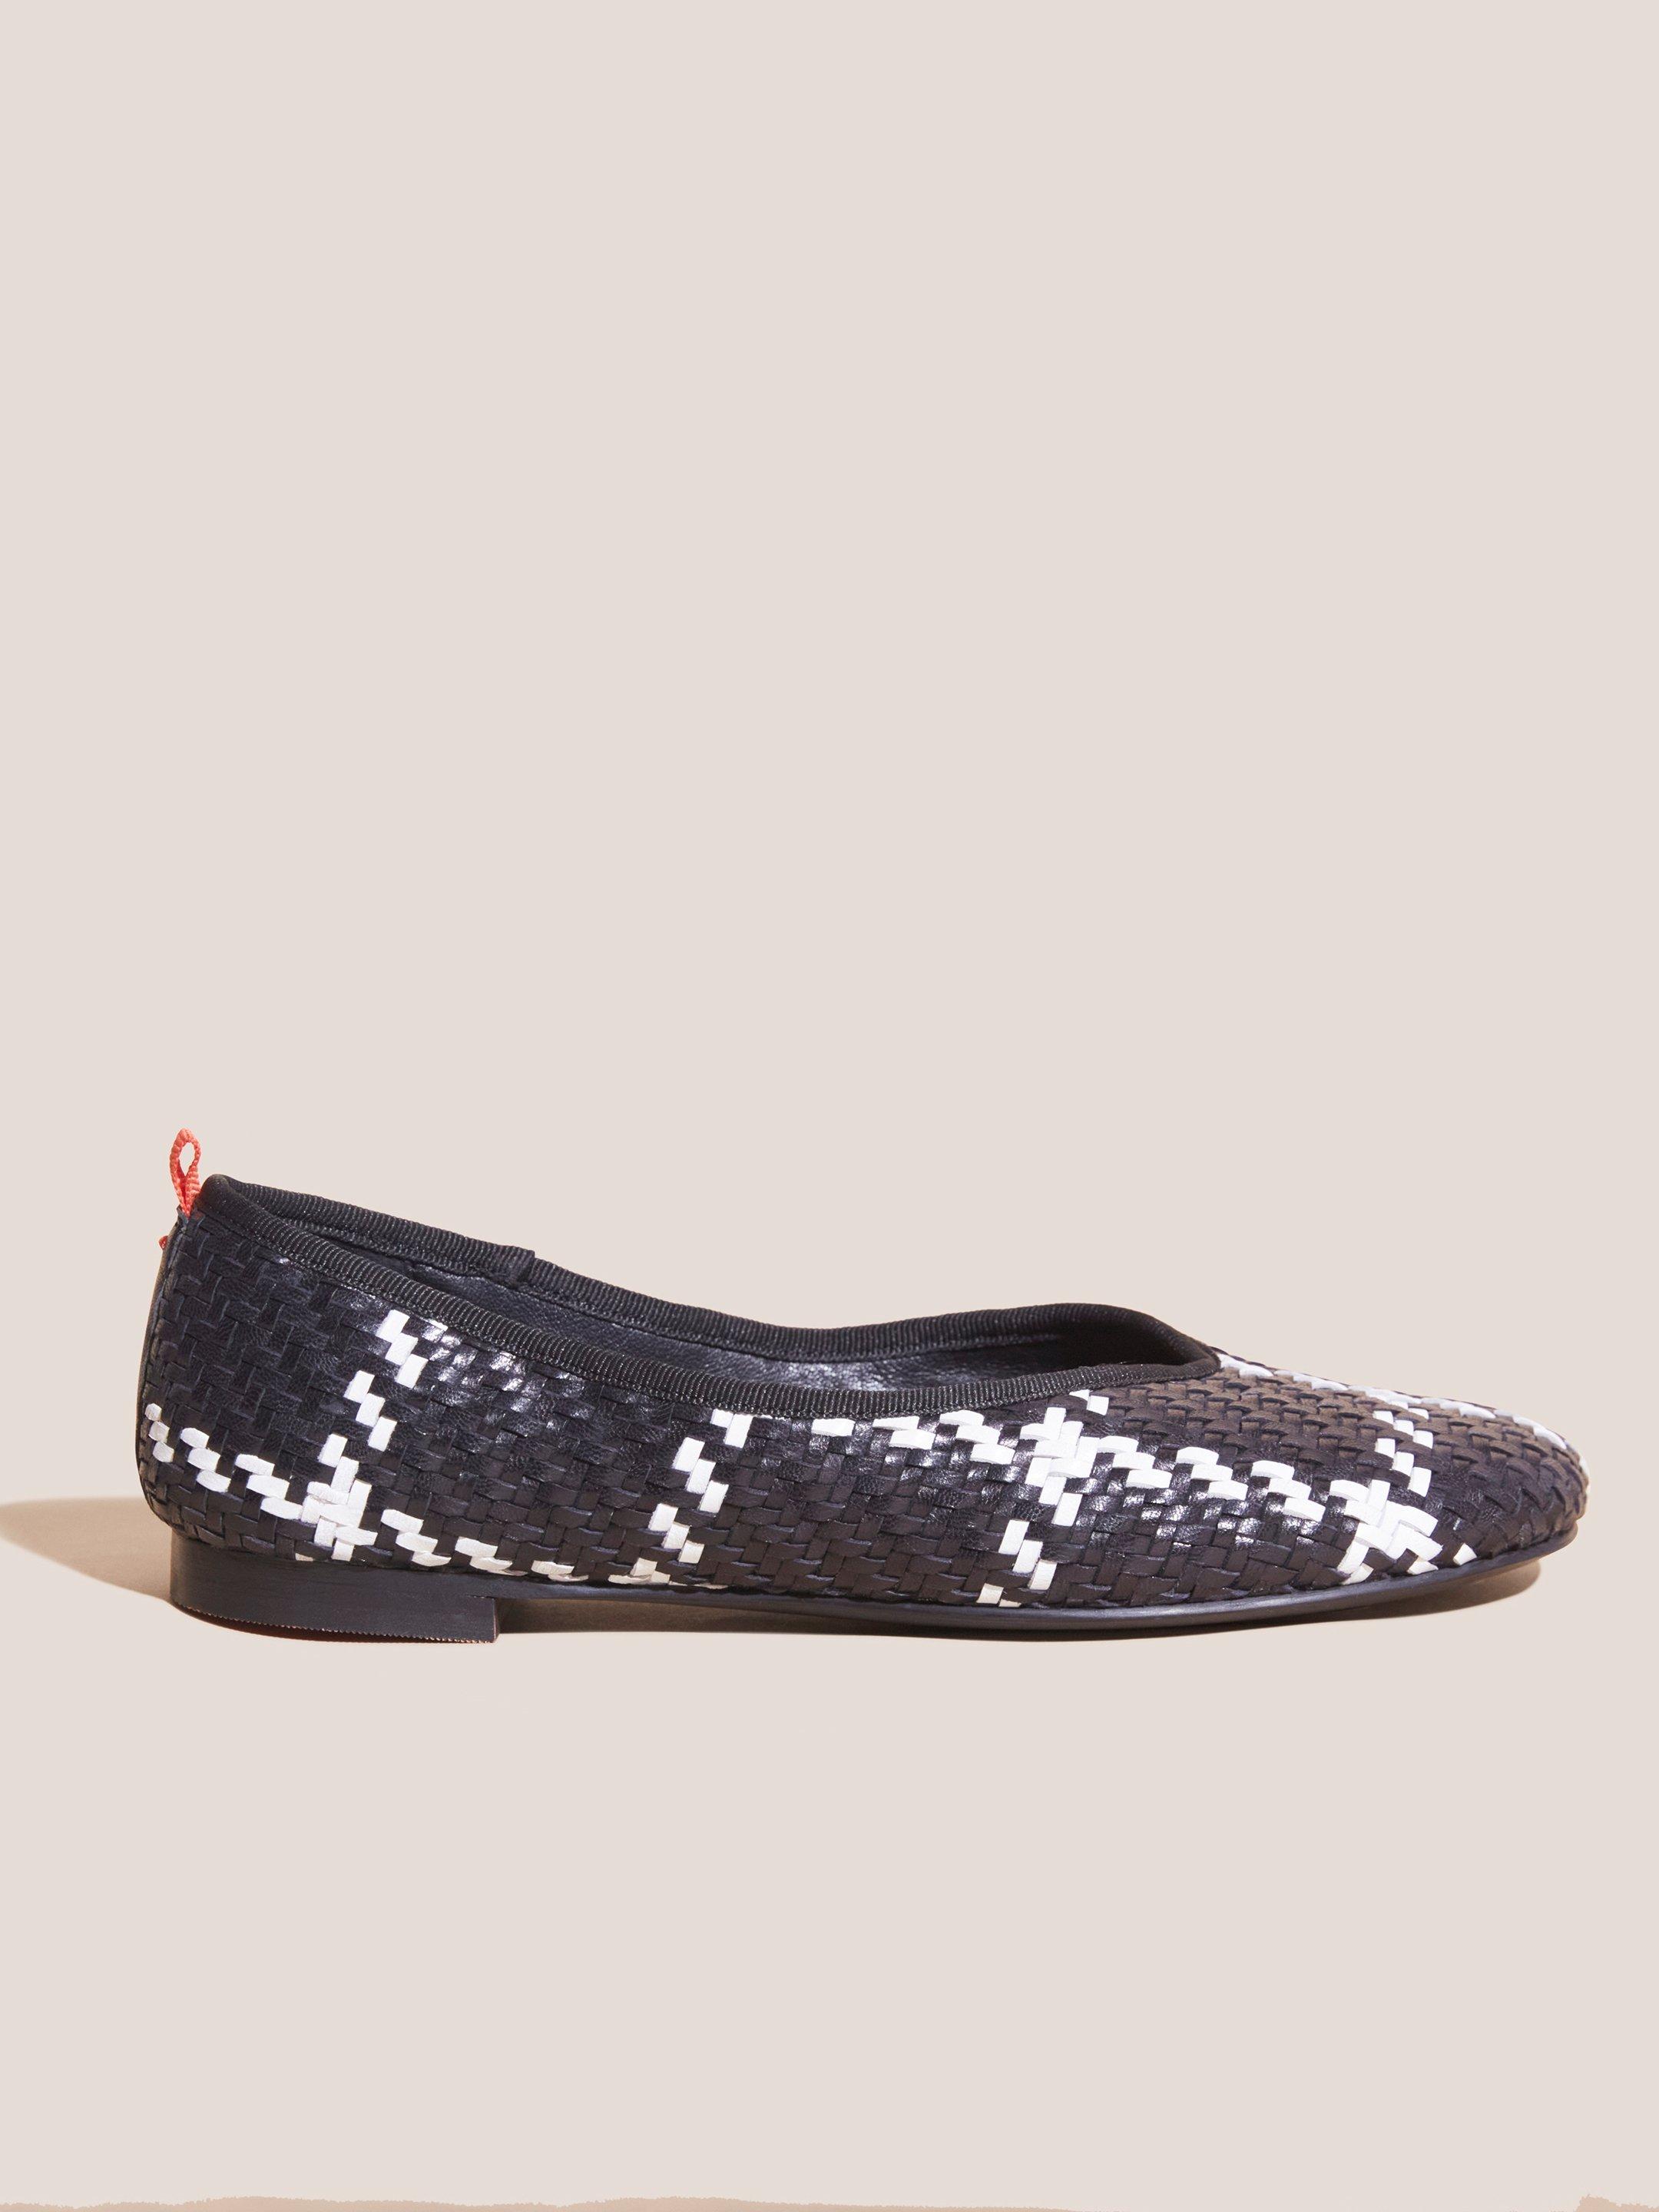 Woven Leather Ballet Pump in BLK MLT - MODEL FRONT